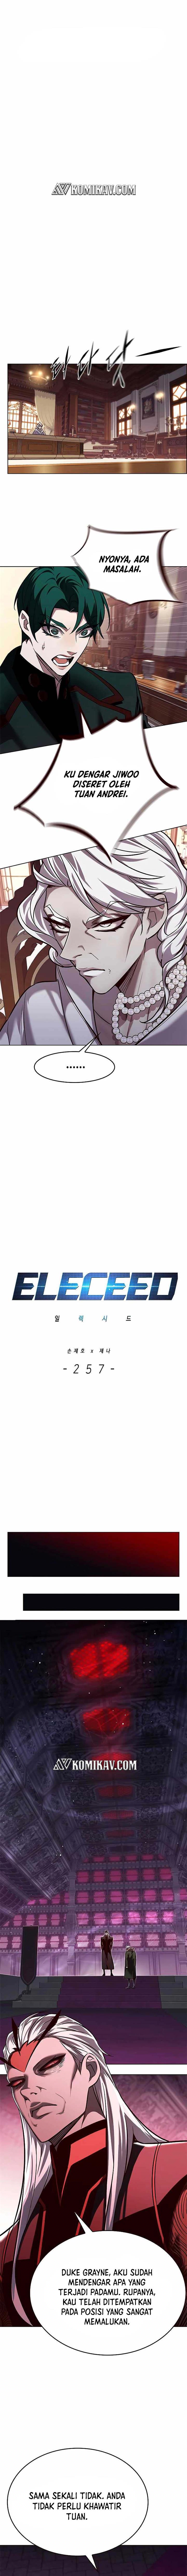 Eleceed Chapter 257